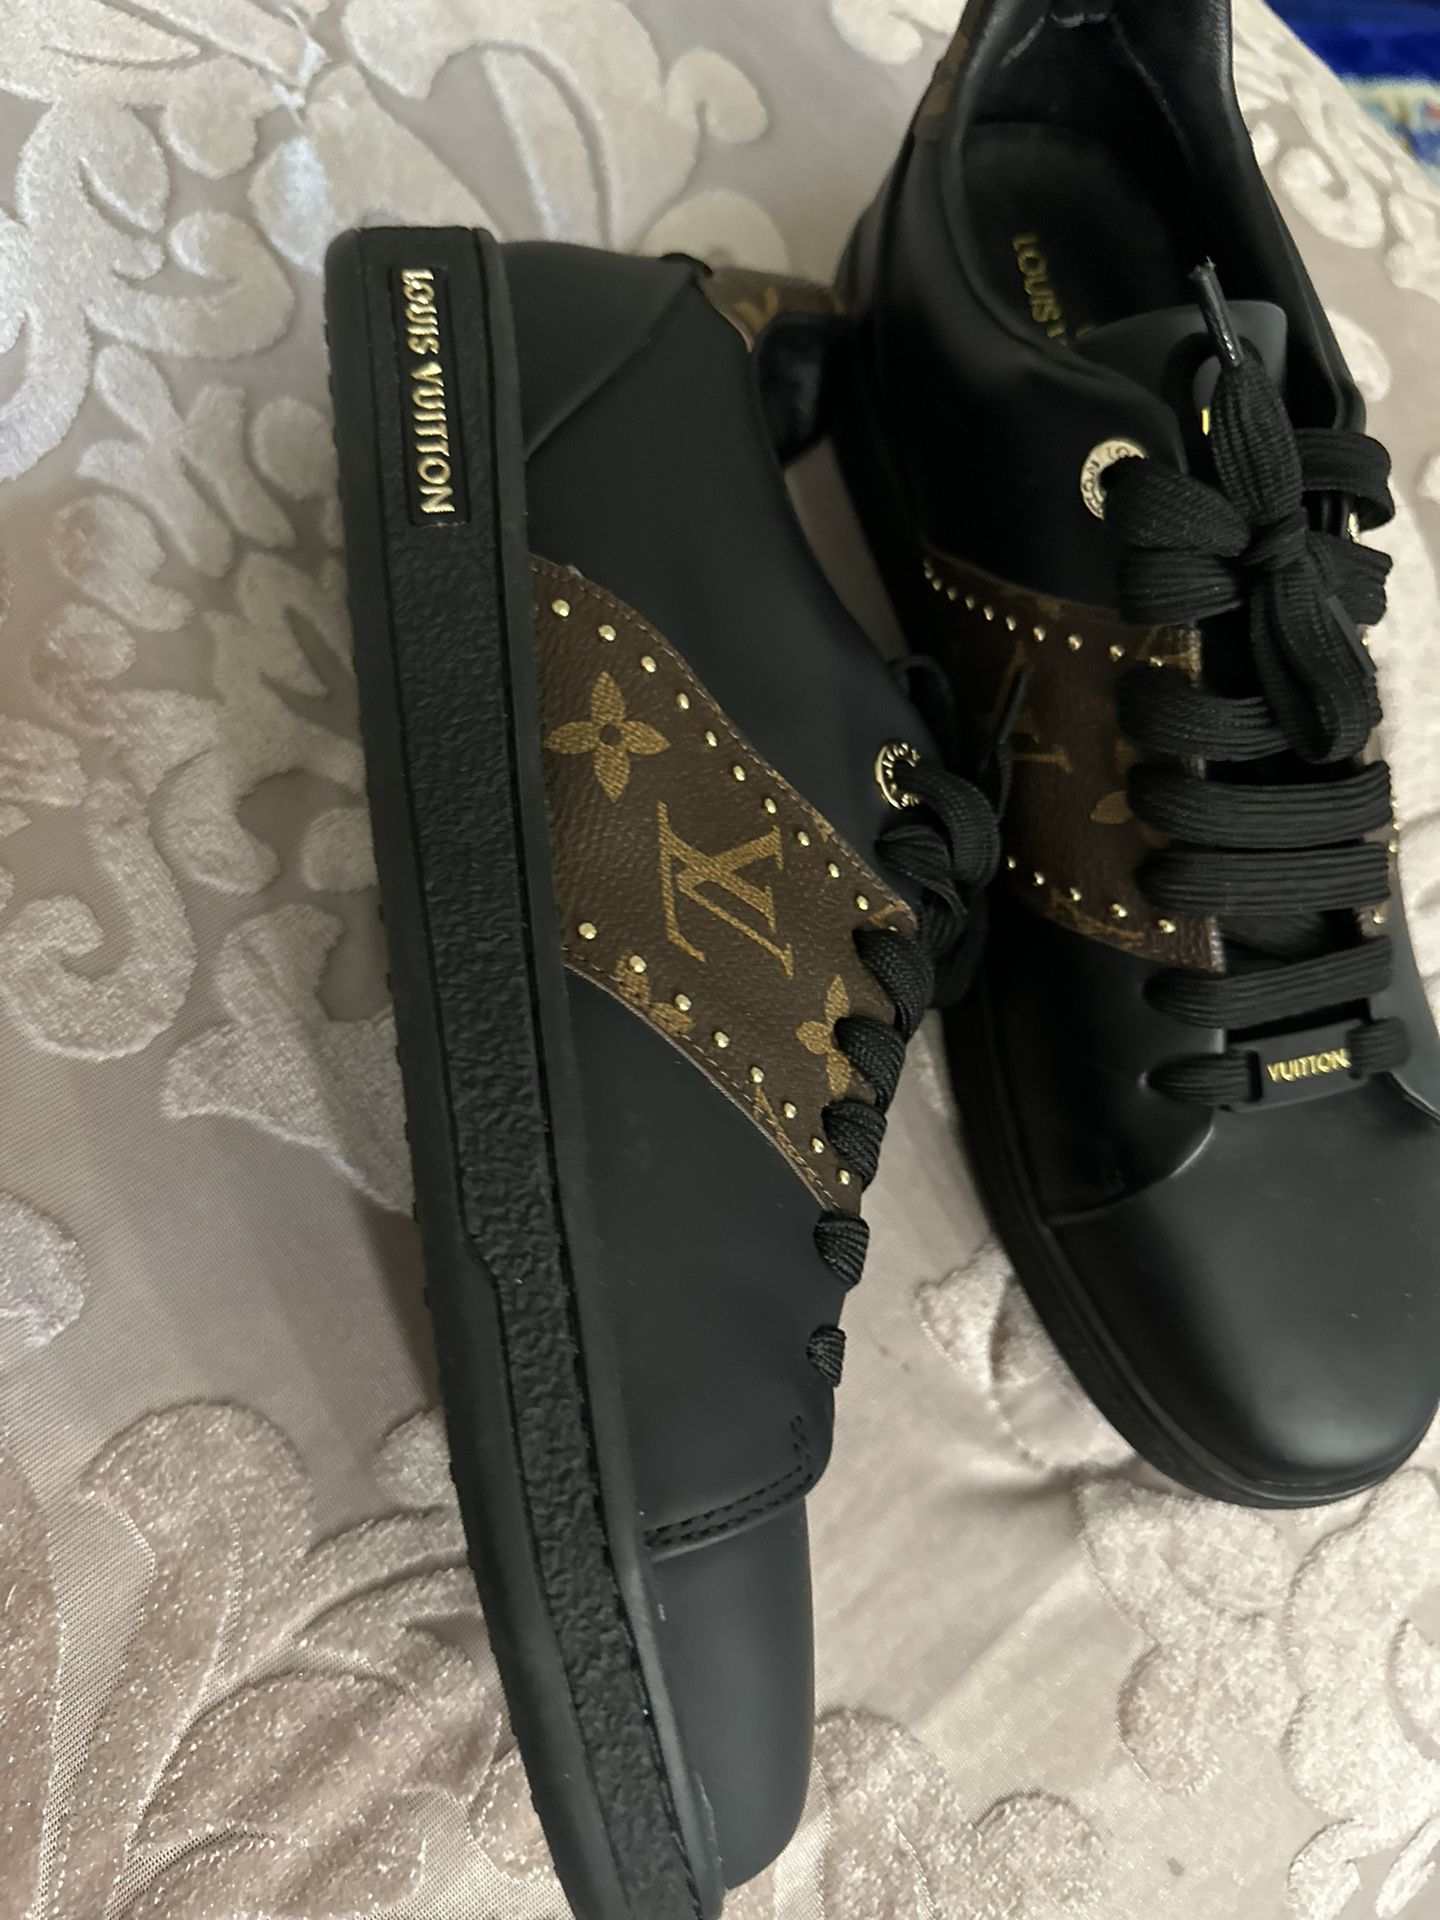 MUST GO Like New Gently Used Authentic Louis Vuitton Shoes for Sale in  Sterling Heights, MI - OfferUp